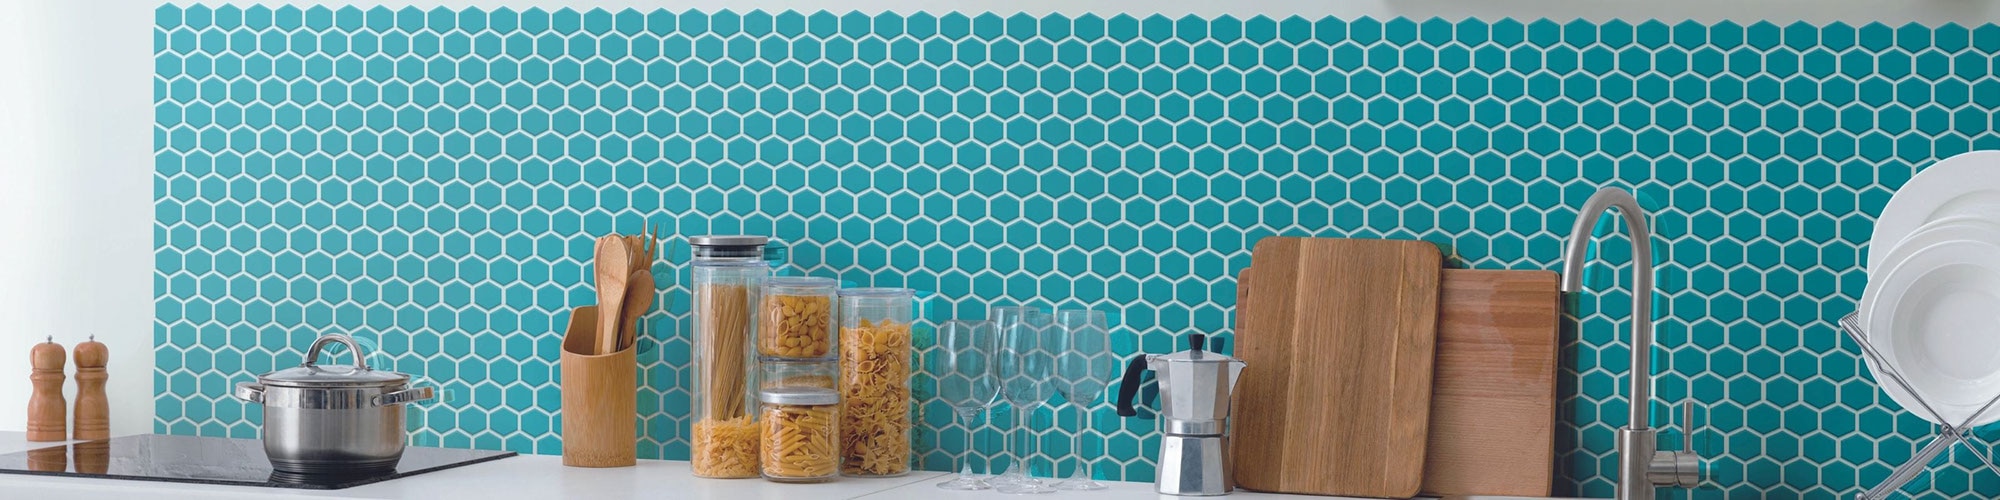 Kitchenette with white quartz countertop, bright teal hexagon mosaic tile backsplash, cutting boards and white plates in a rack.